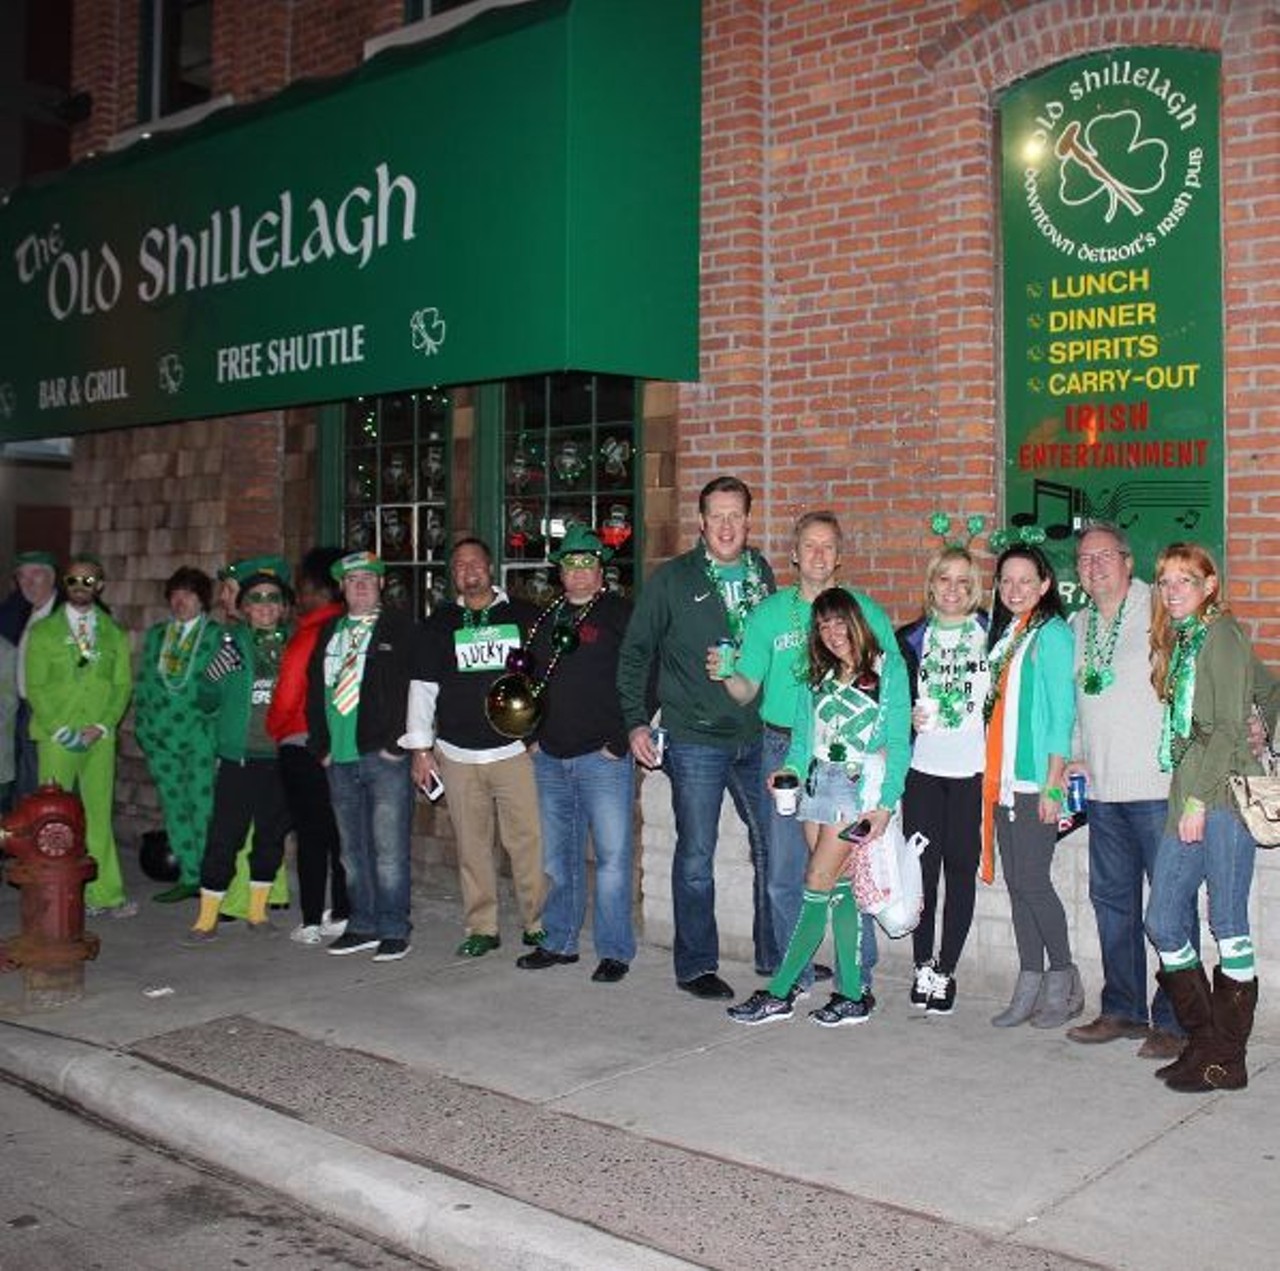 Old Shillelagh
There&#146;s a reason the Old Shillelagh has been voted &#147;Best Bar in Wayne County&#148; in our Best of Detroit poll. They go all-out every year for St. Patrick&#146;s Day, and this year will be no exception. Detroit Irish-punk-metal-folk band Stone Clover will play sets throughout the day, and a heated tent and a heated outdoor rooftop deck expand the Old Shillelagh&#146;s offerings. (See the bar&#146;s website for a full schedule, starting with &#147;St. Practice Day&#148; on Saturday. March 11.)
Starts at 7 a.m., 349 Monroe St., Detroit; 313-964-0007; oldshillelagh.com. Photo via @channel955